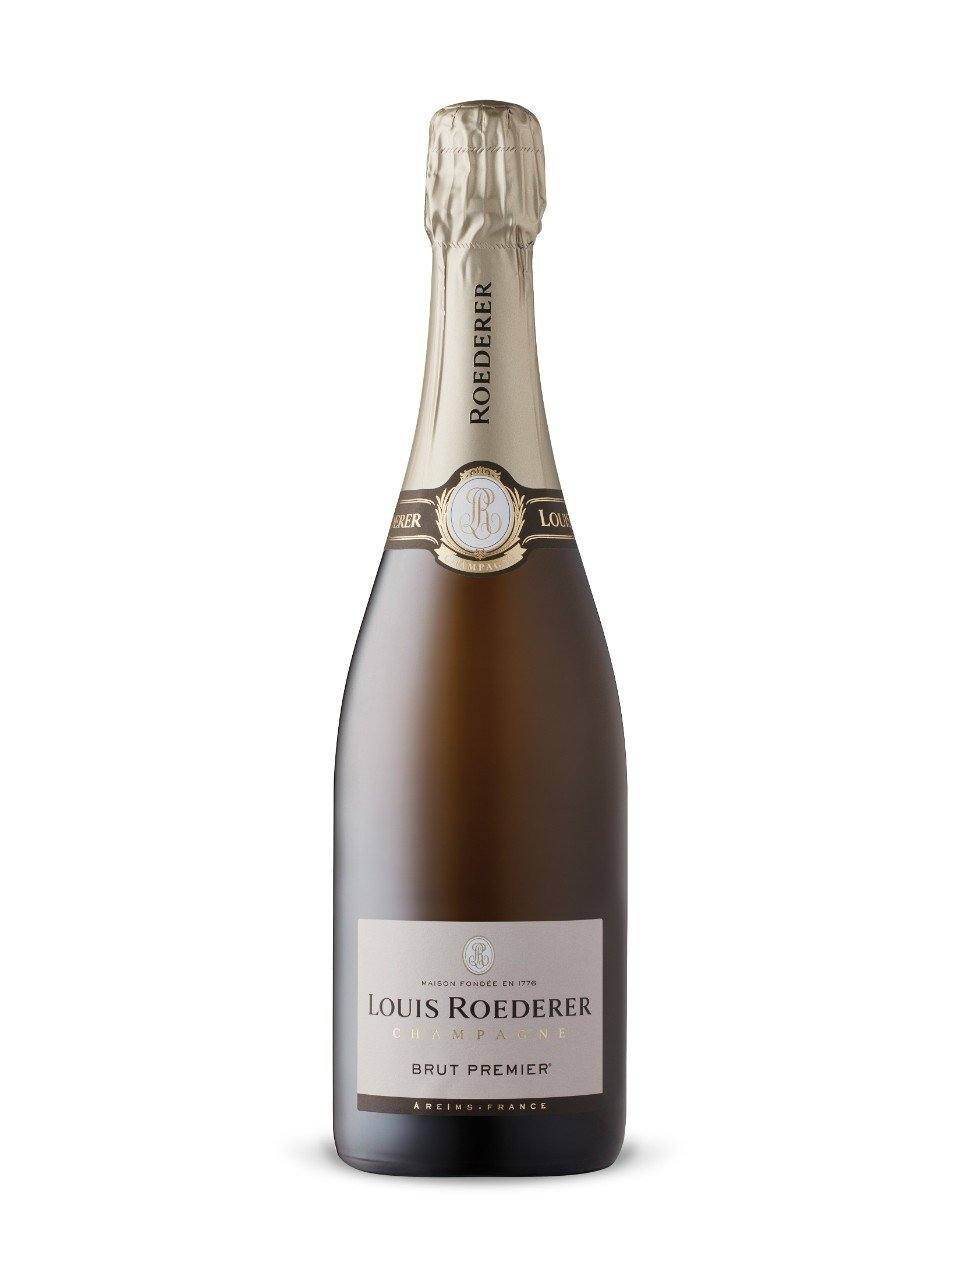 Louis Roederer Collection Brut Premier Champagne | Exquisite Wine & Alcohol Gift Delivery Toronto Canada | Vyno